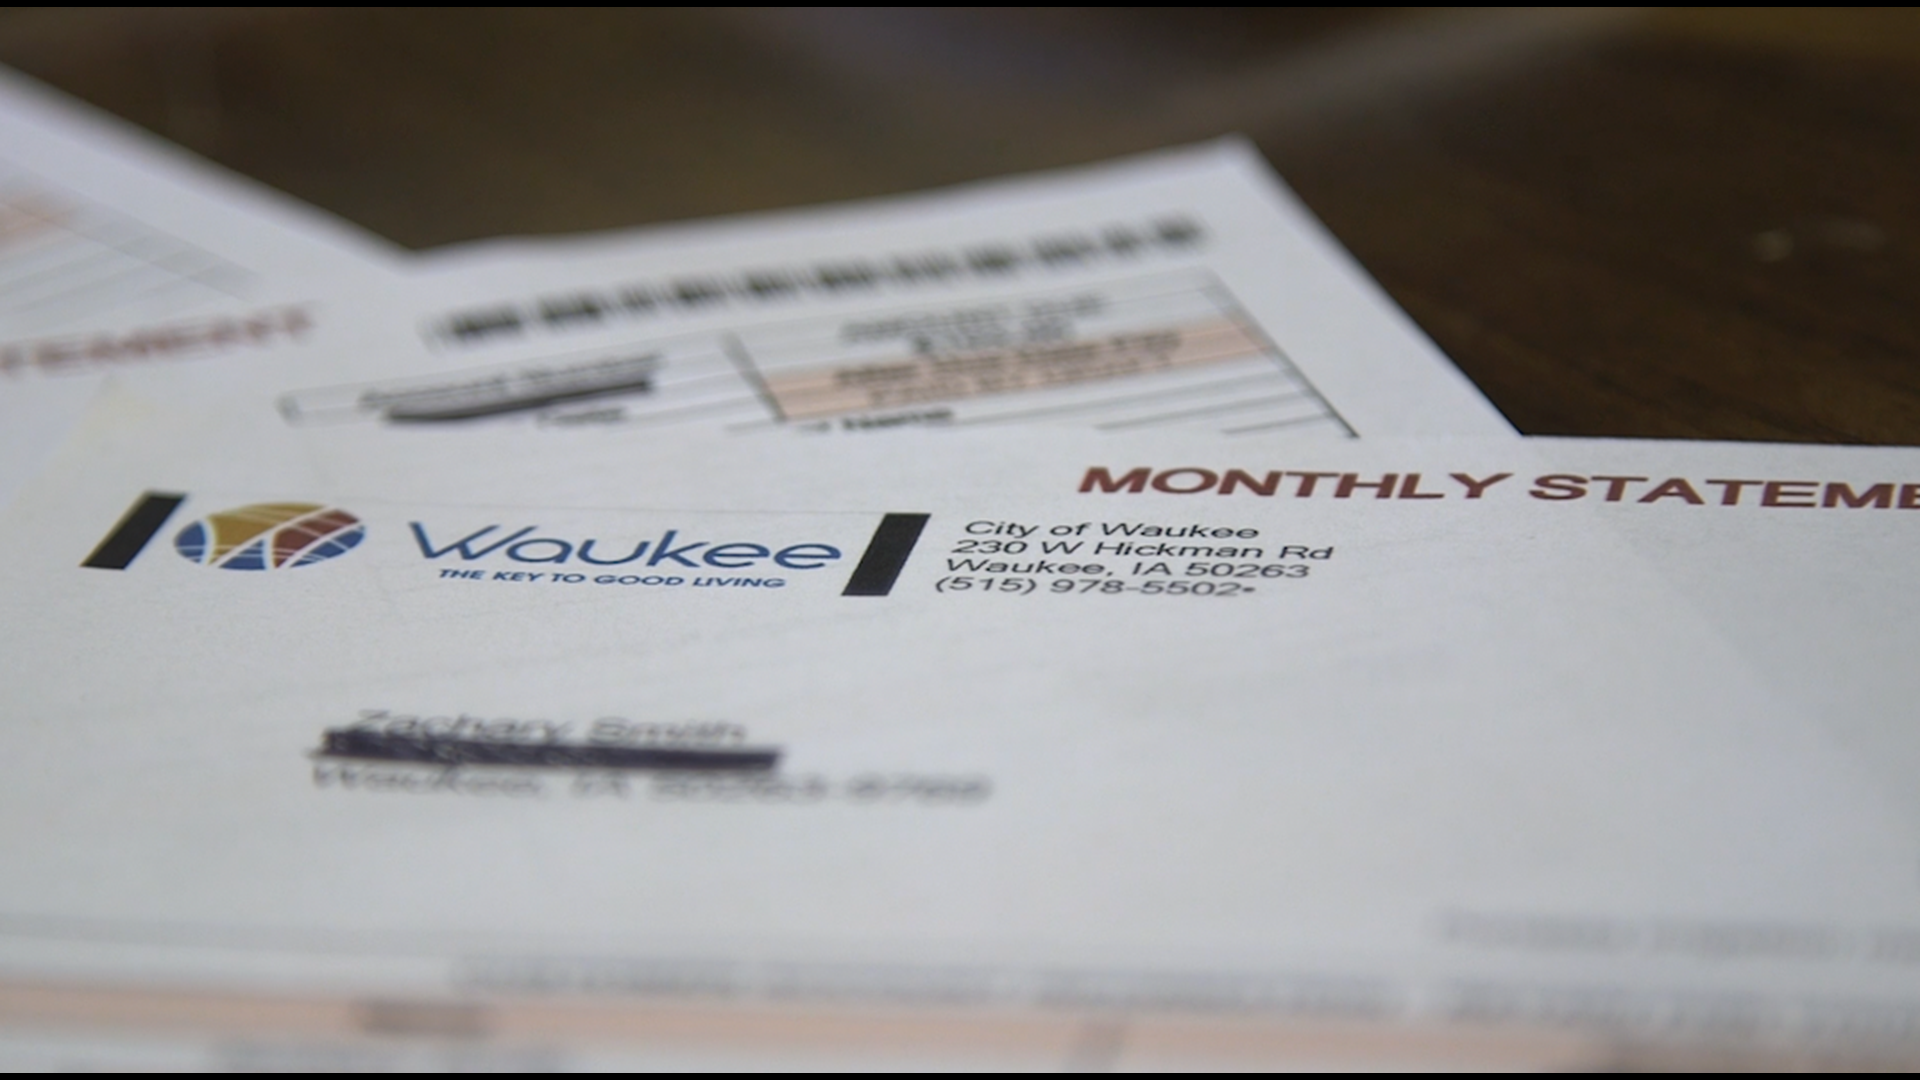 Many residents saw around a $200 increase in their energy bill for the month of February.